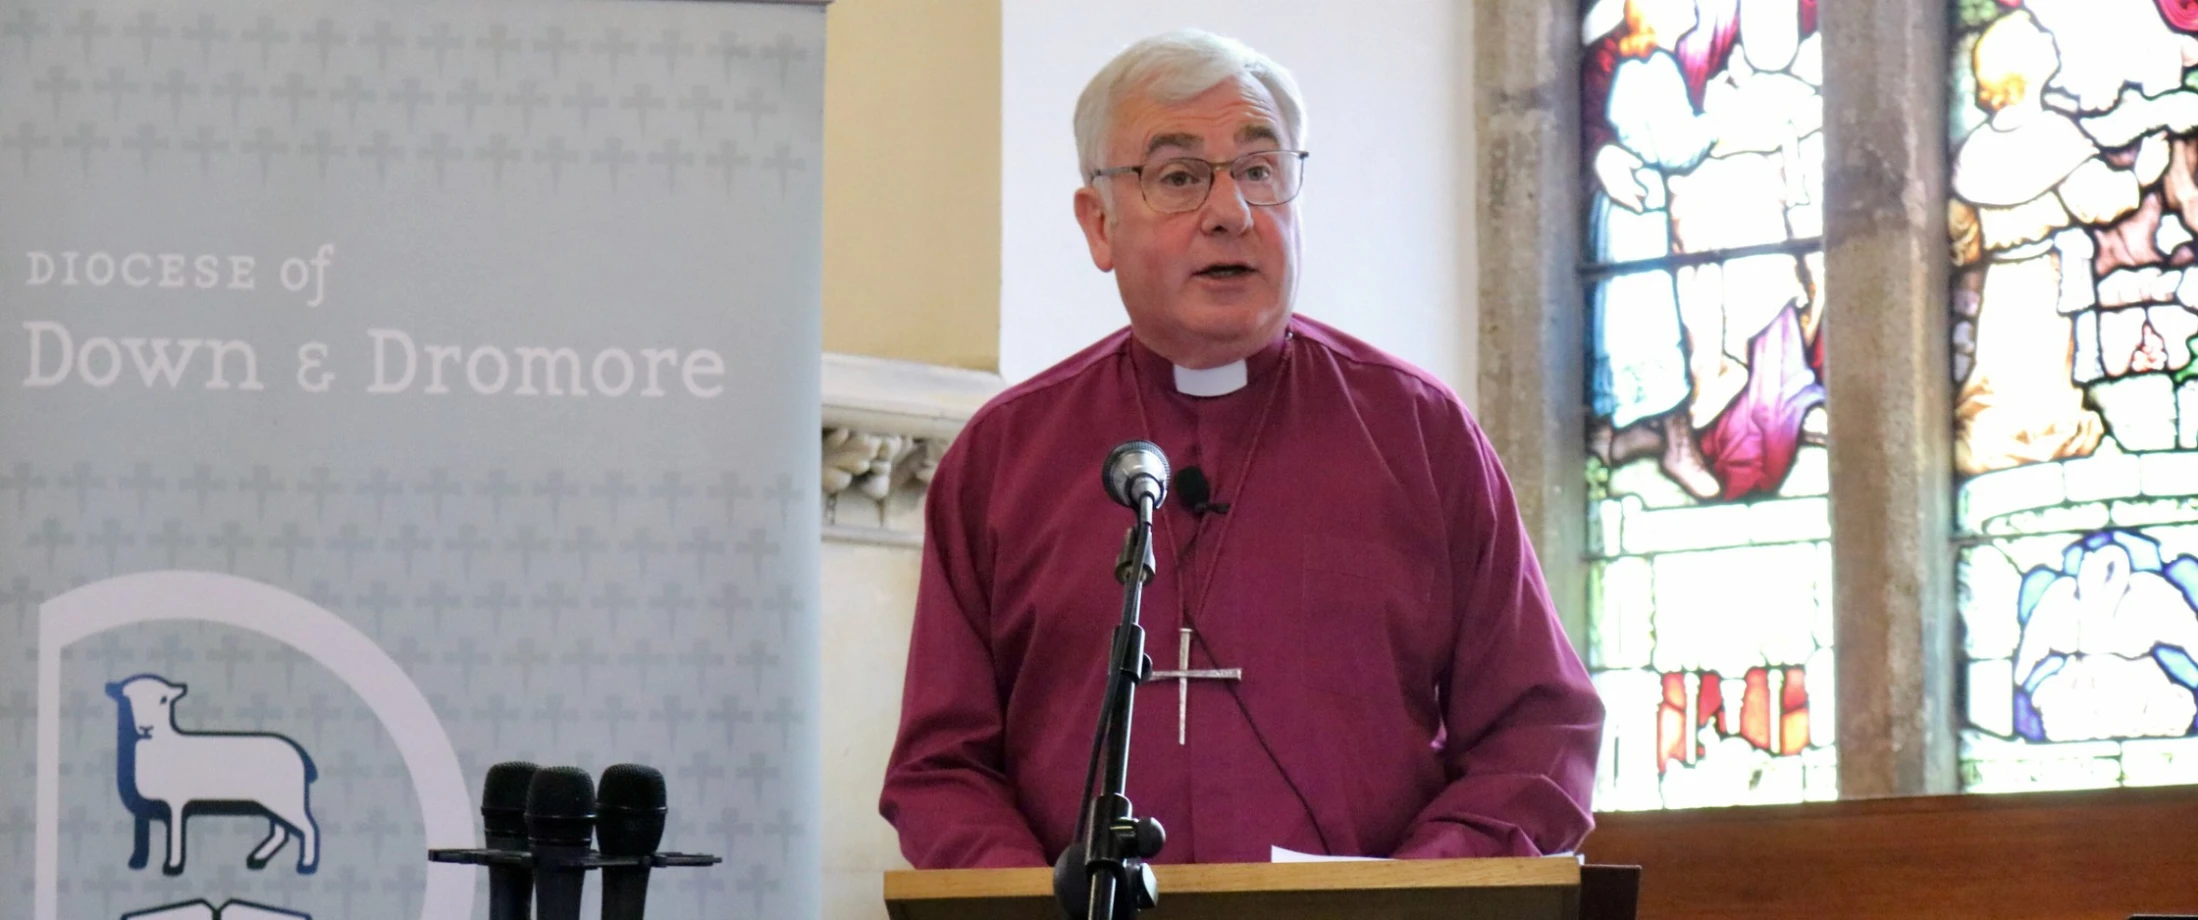 Diocesan Synod meets in Dromore Cathedral